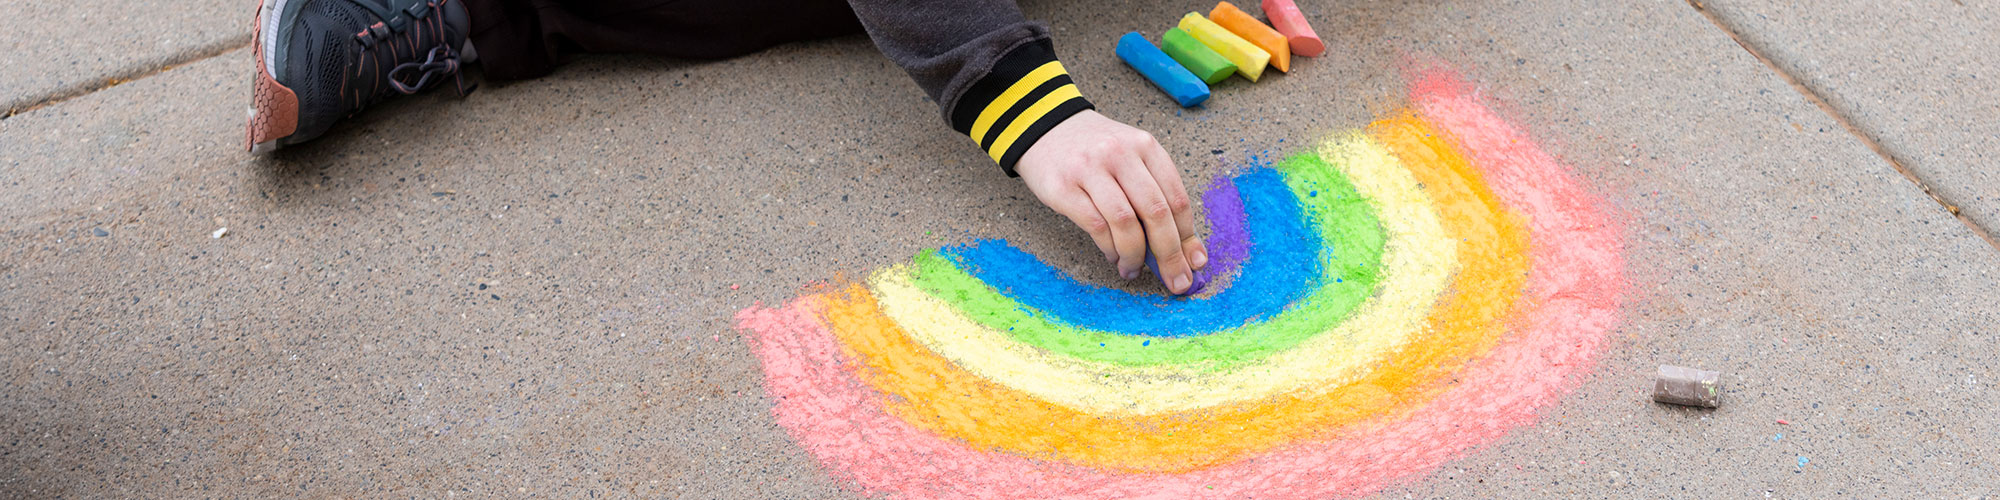 Close up of a hand making a chalk drawing of a rainbow on a sidewalk